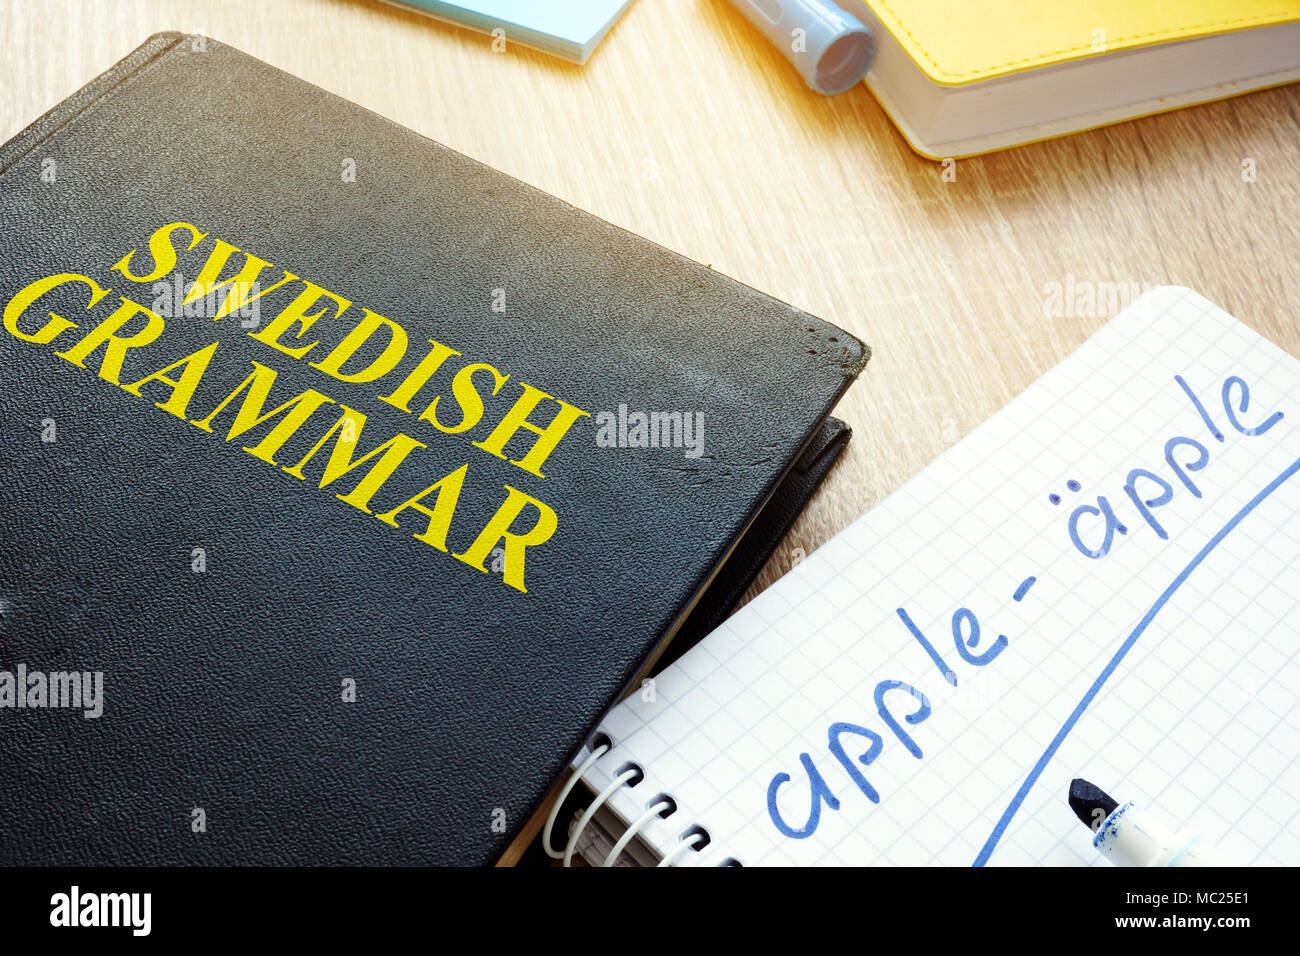 Book with title Swedish grammar and notebook Stock Photo